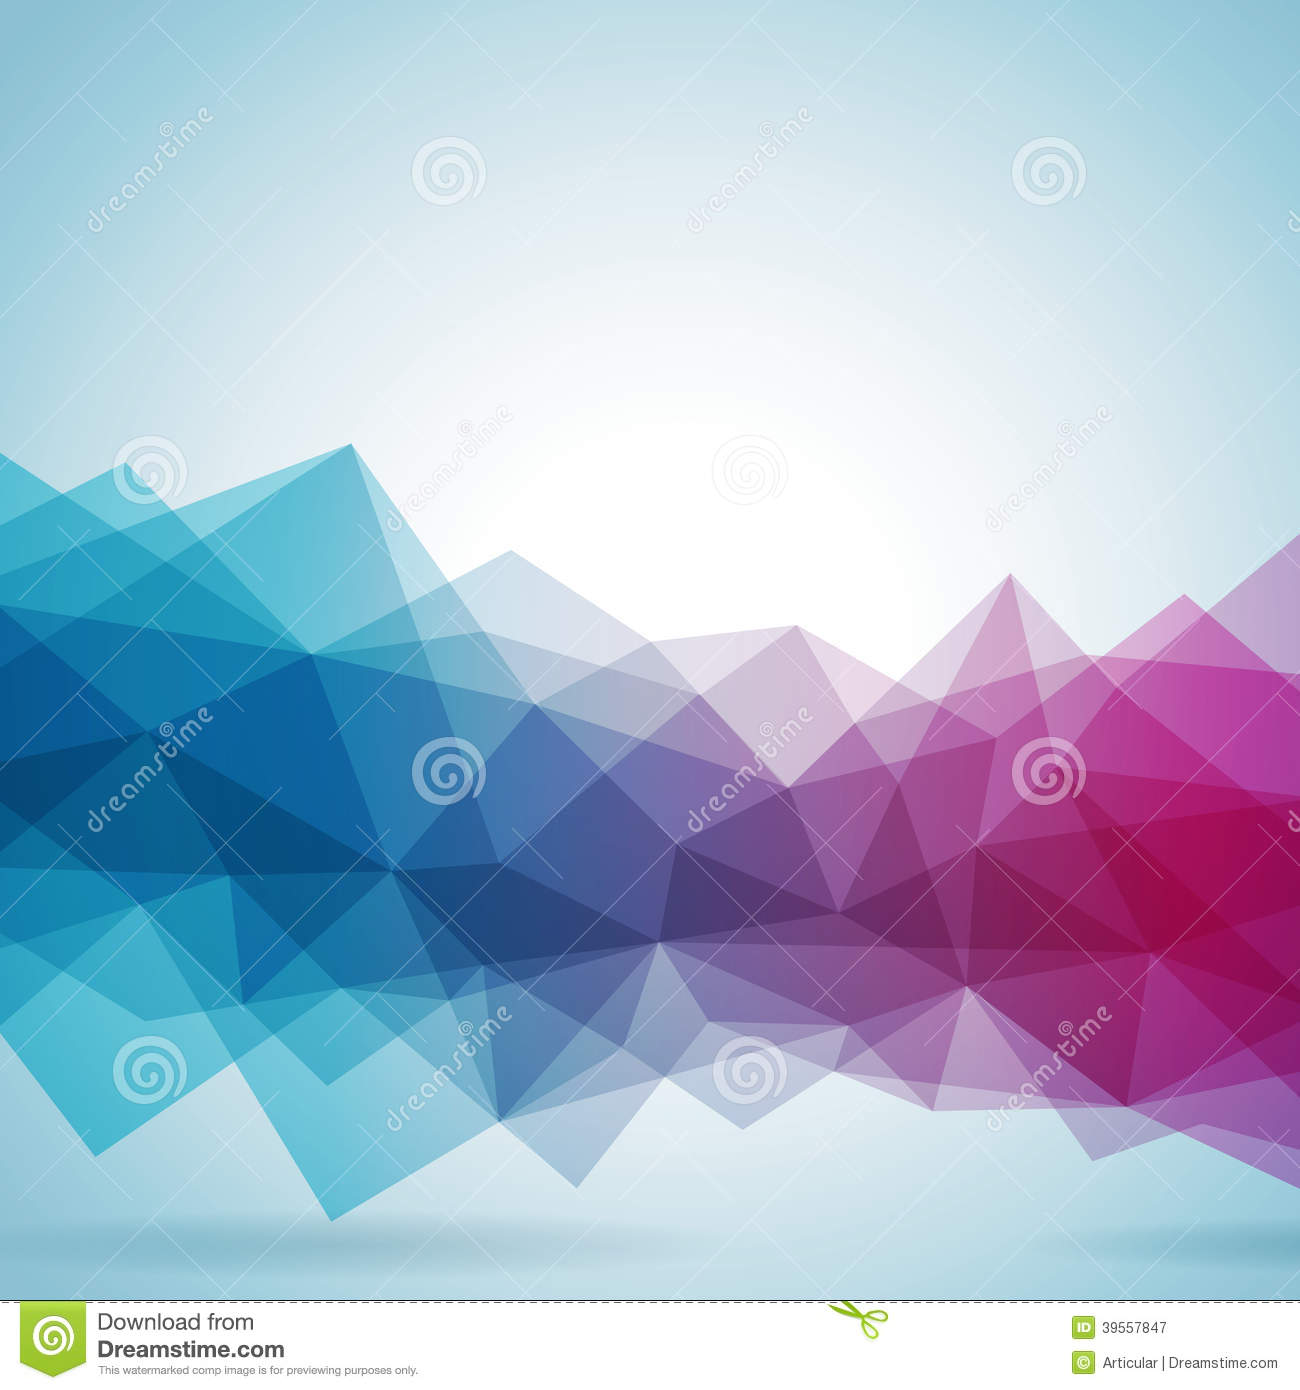 Geometric Abstract Vector Design